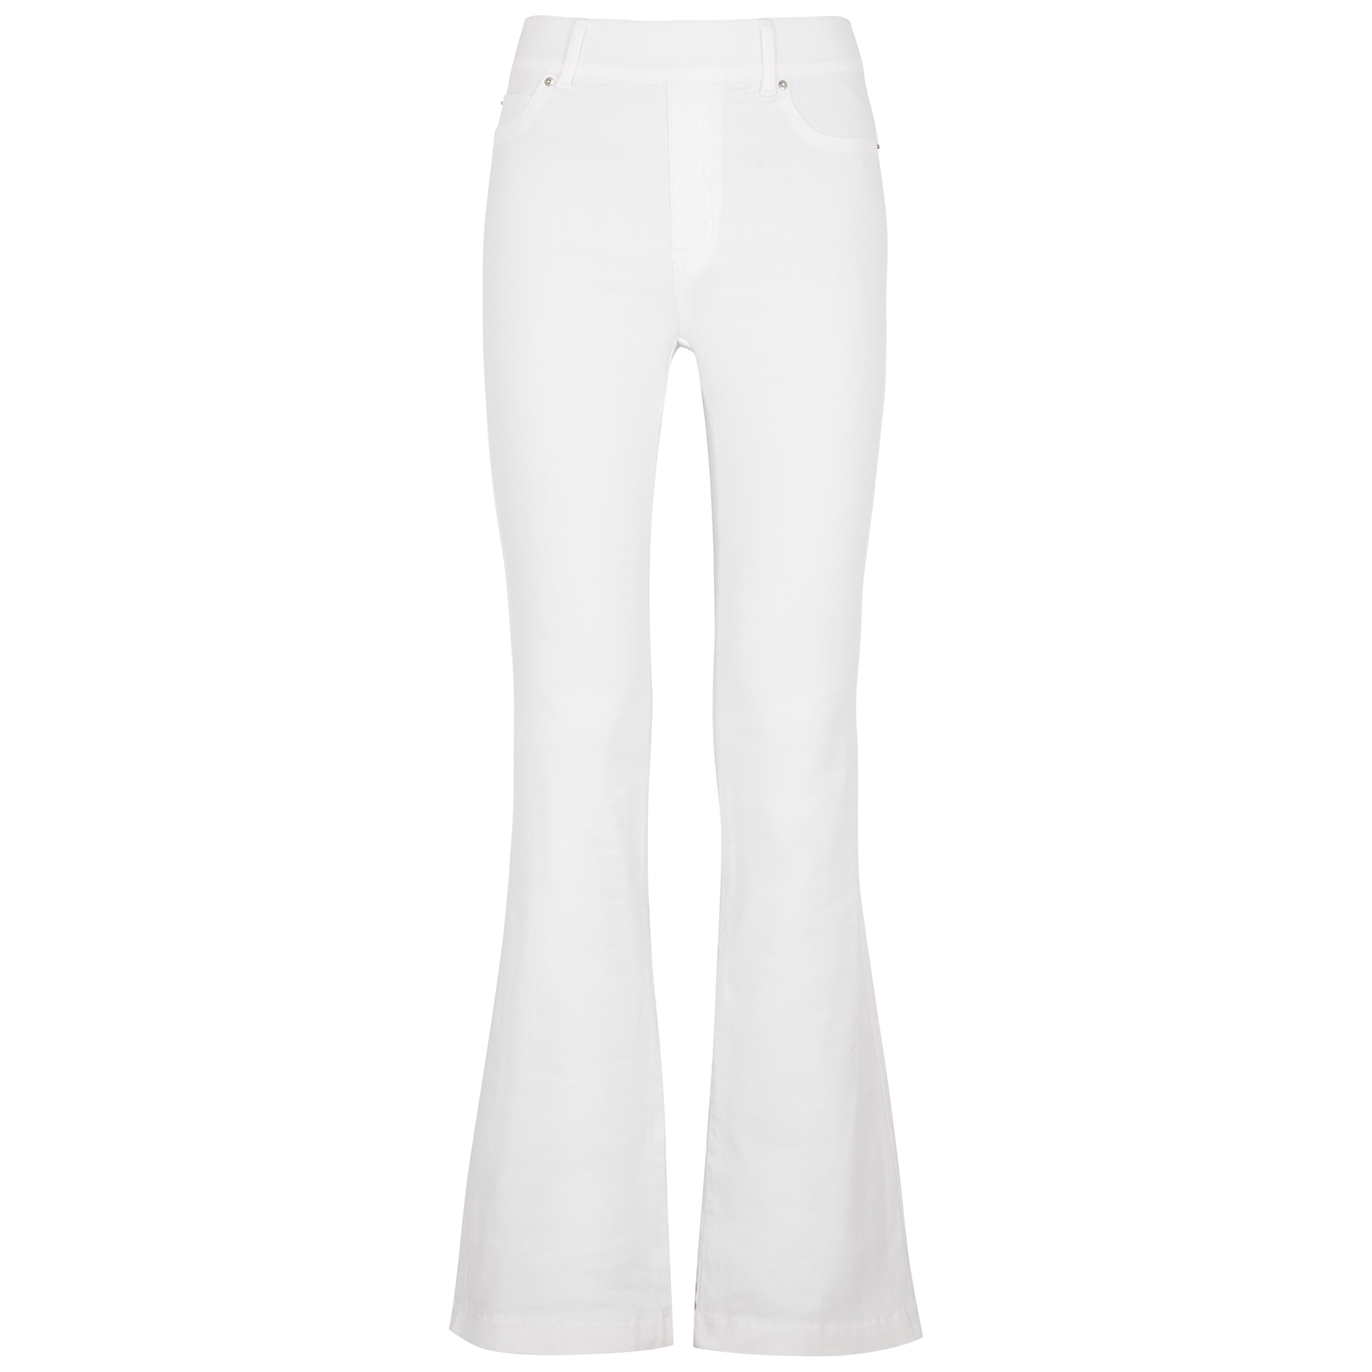 Spanx White Flared Jeans - XS